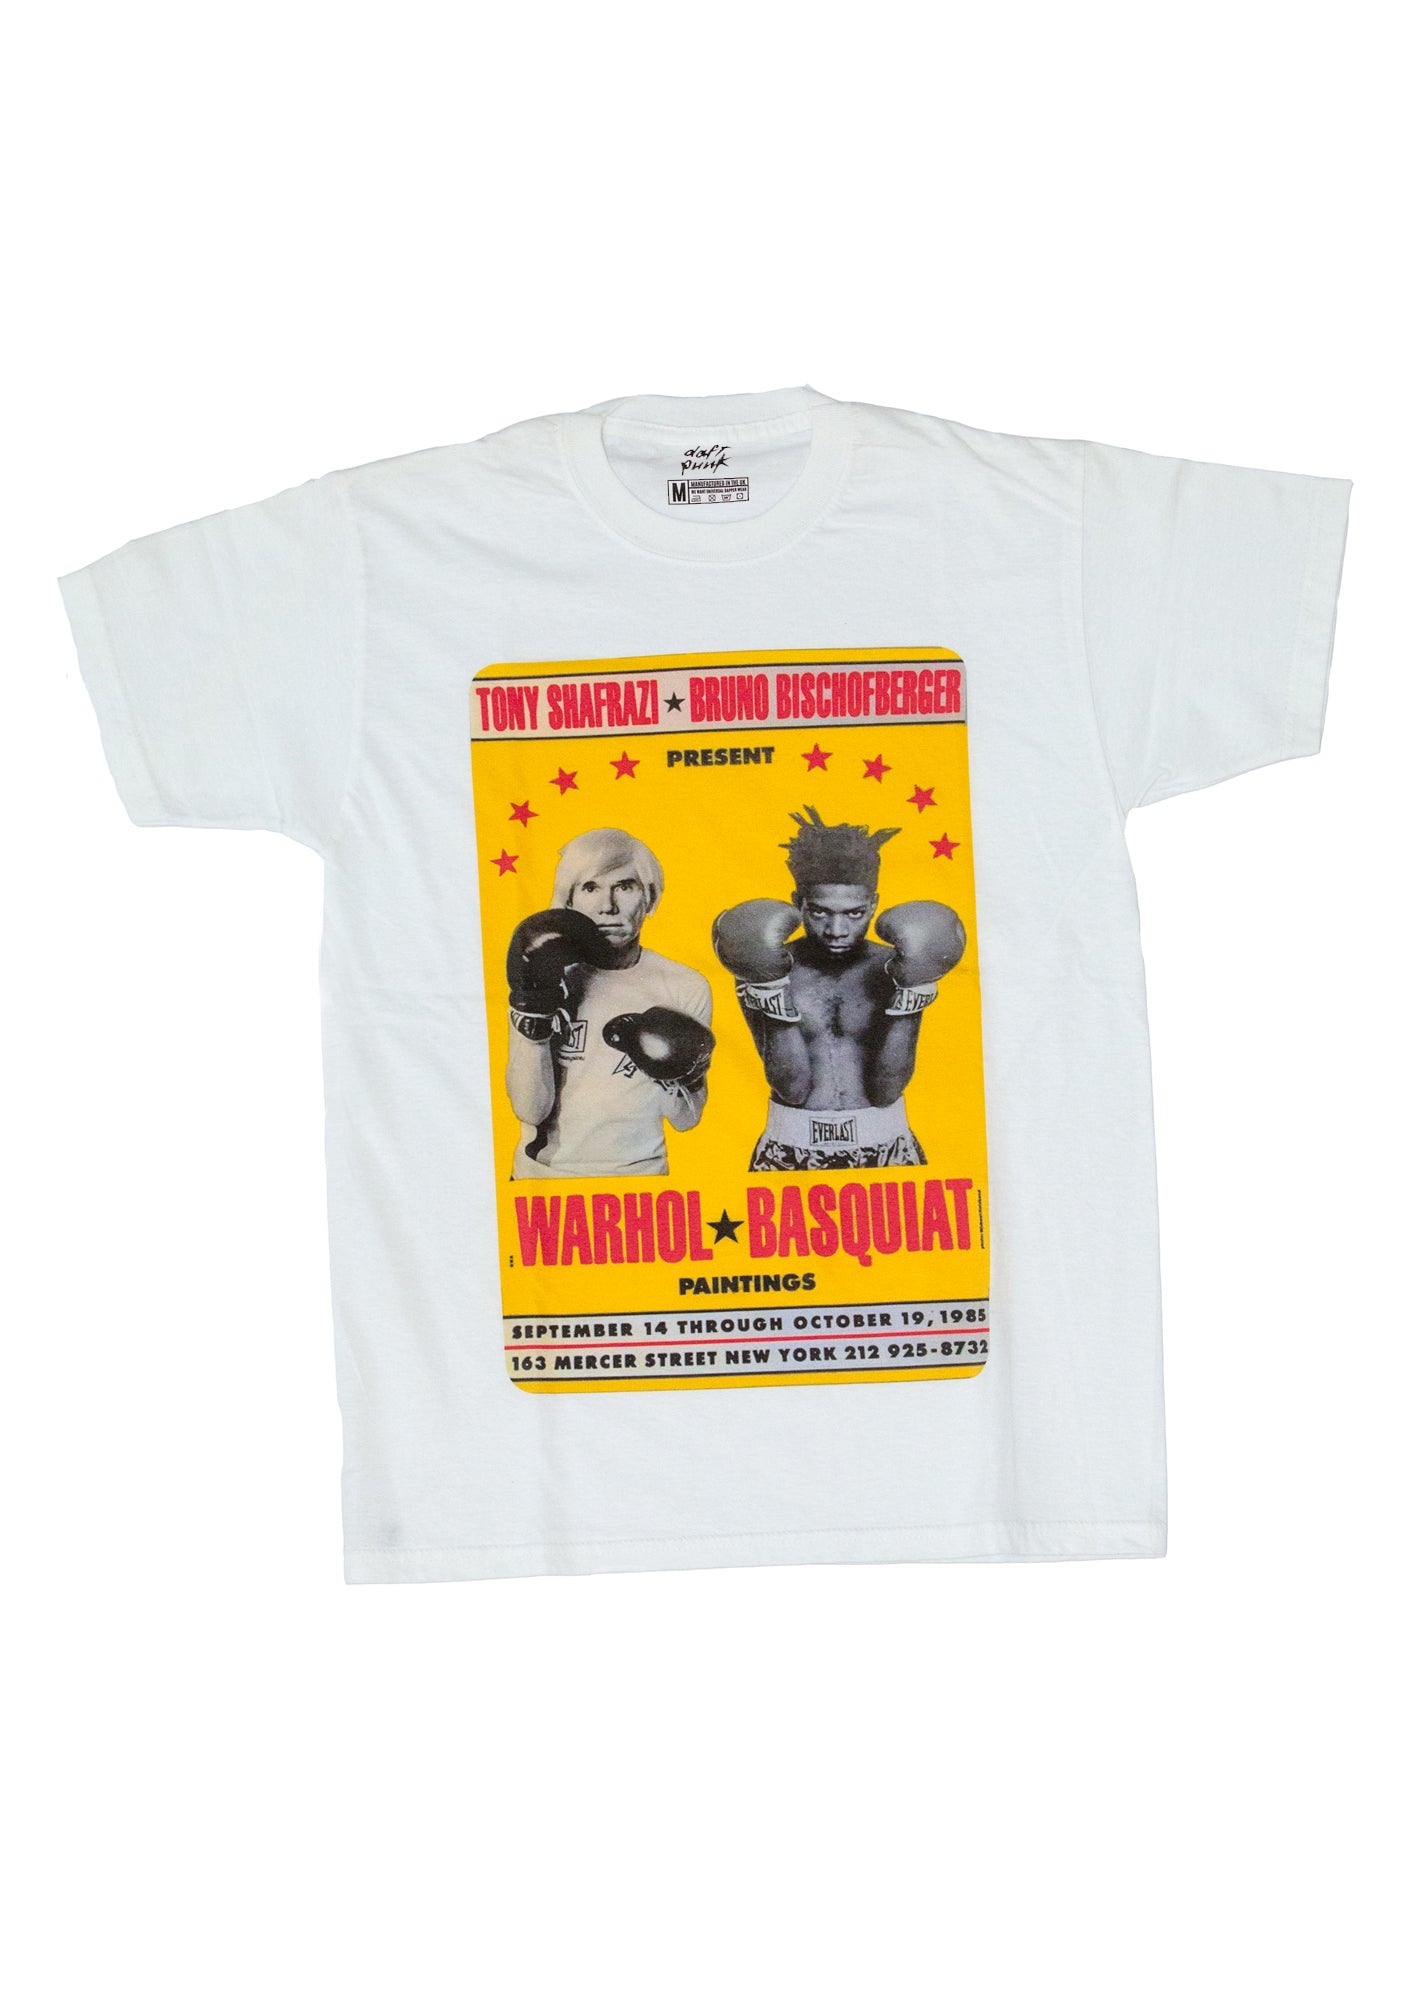 Andy Warhol and Jean-Michel Basquiat T-Shirt